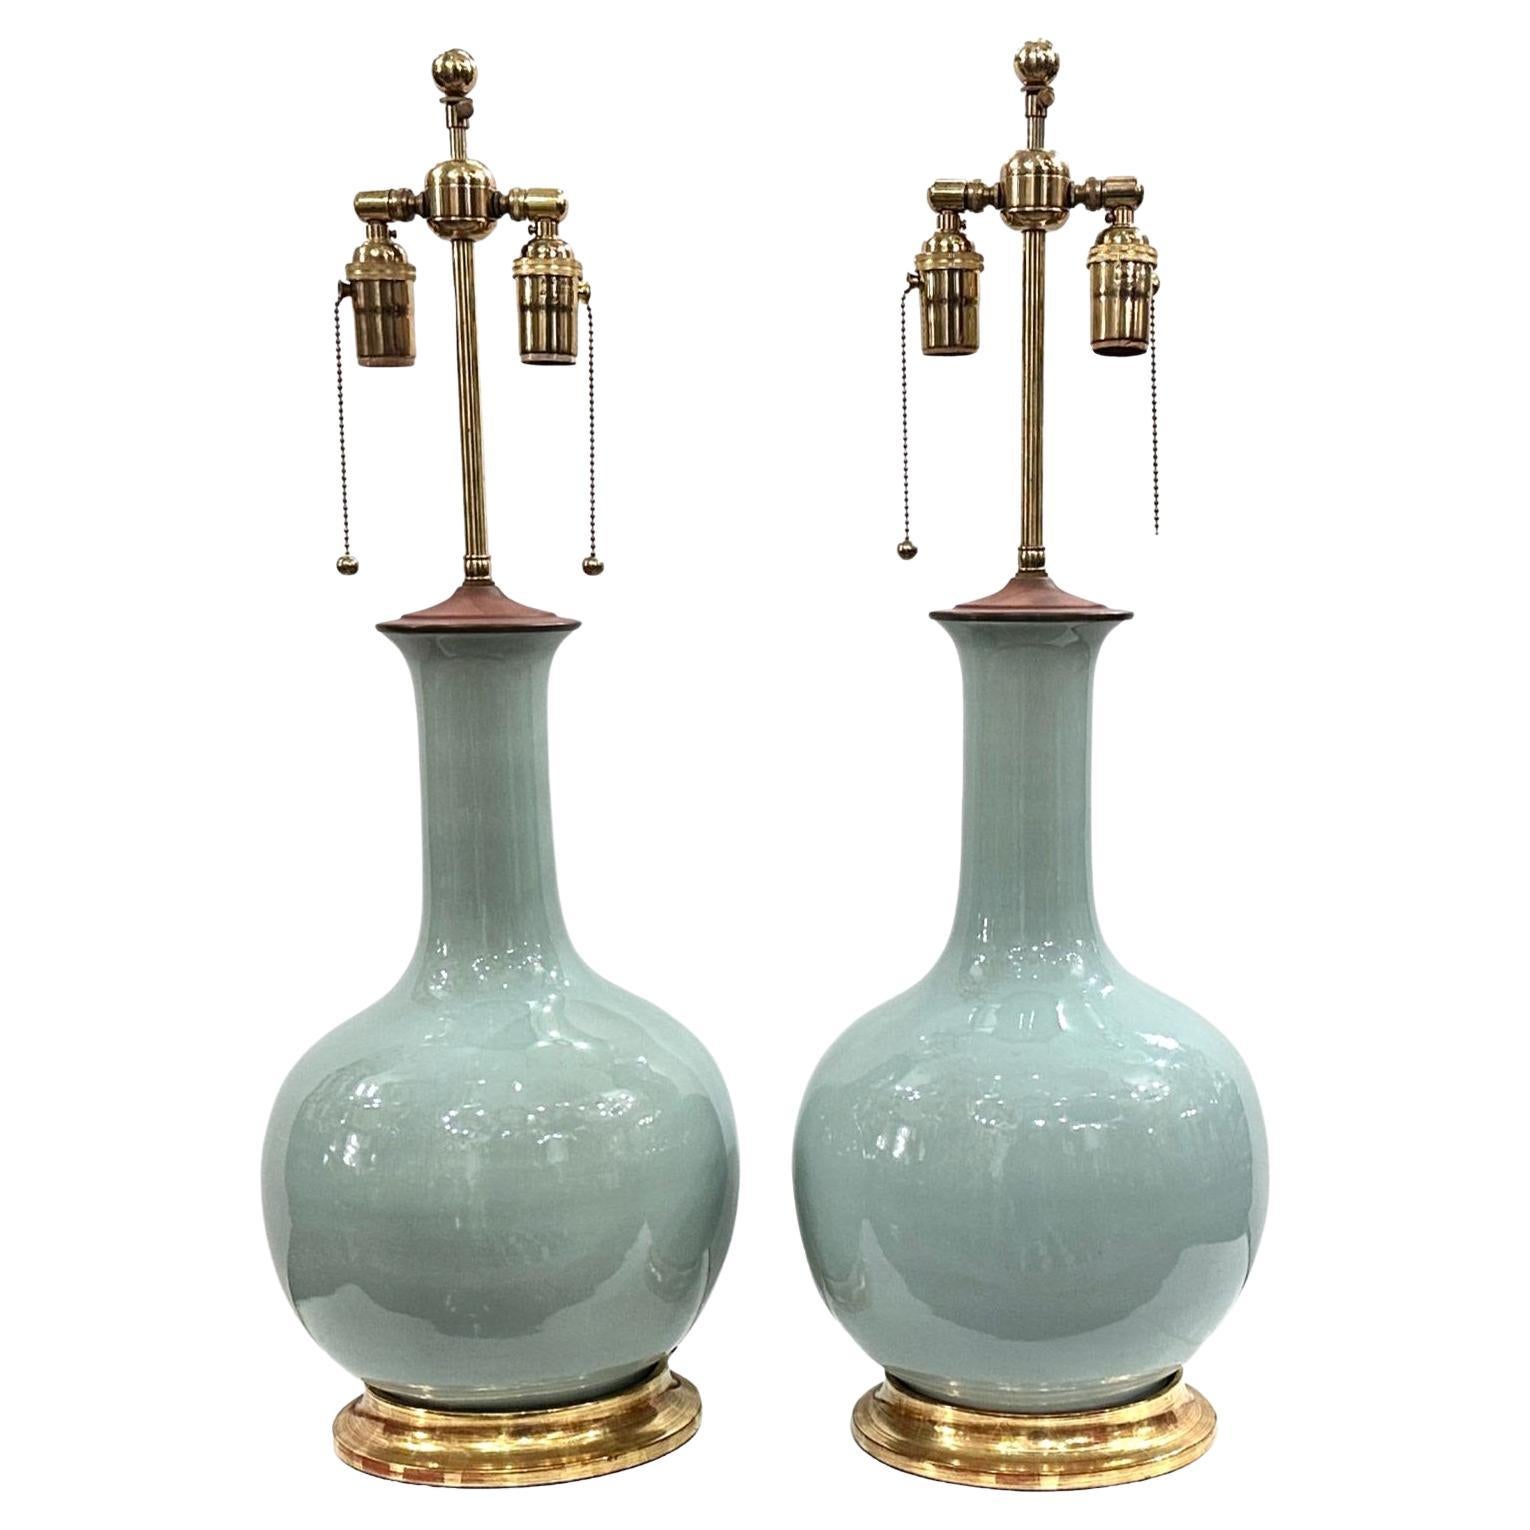 Pair of French Celadon Lamps 